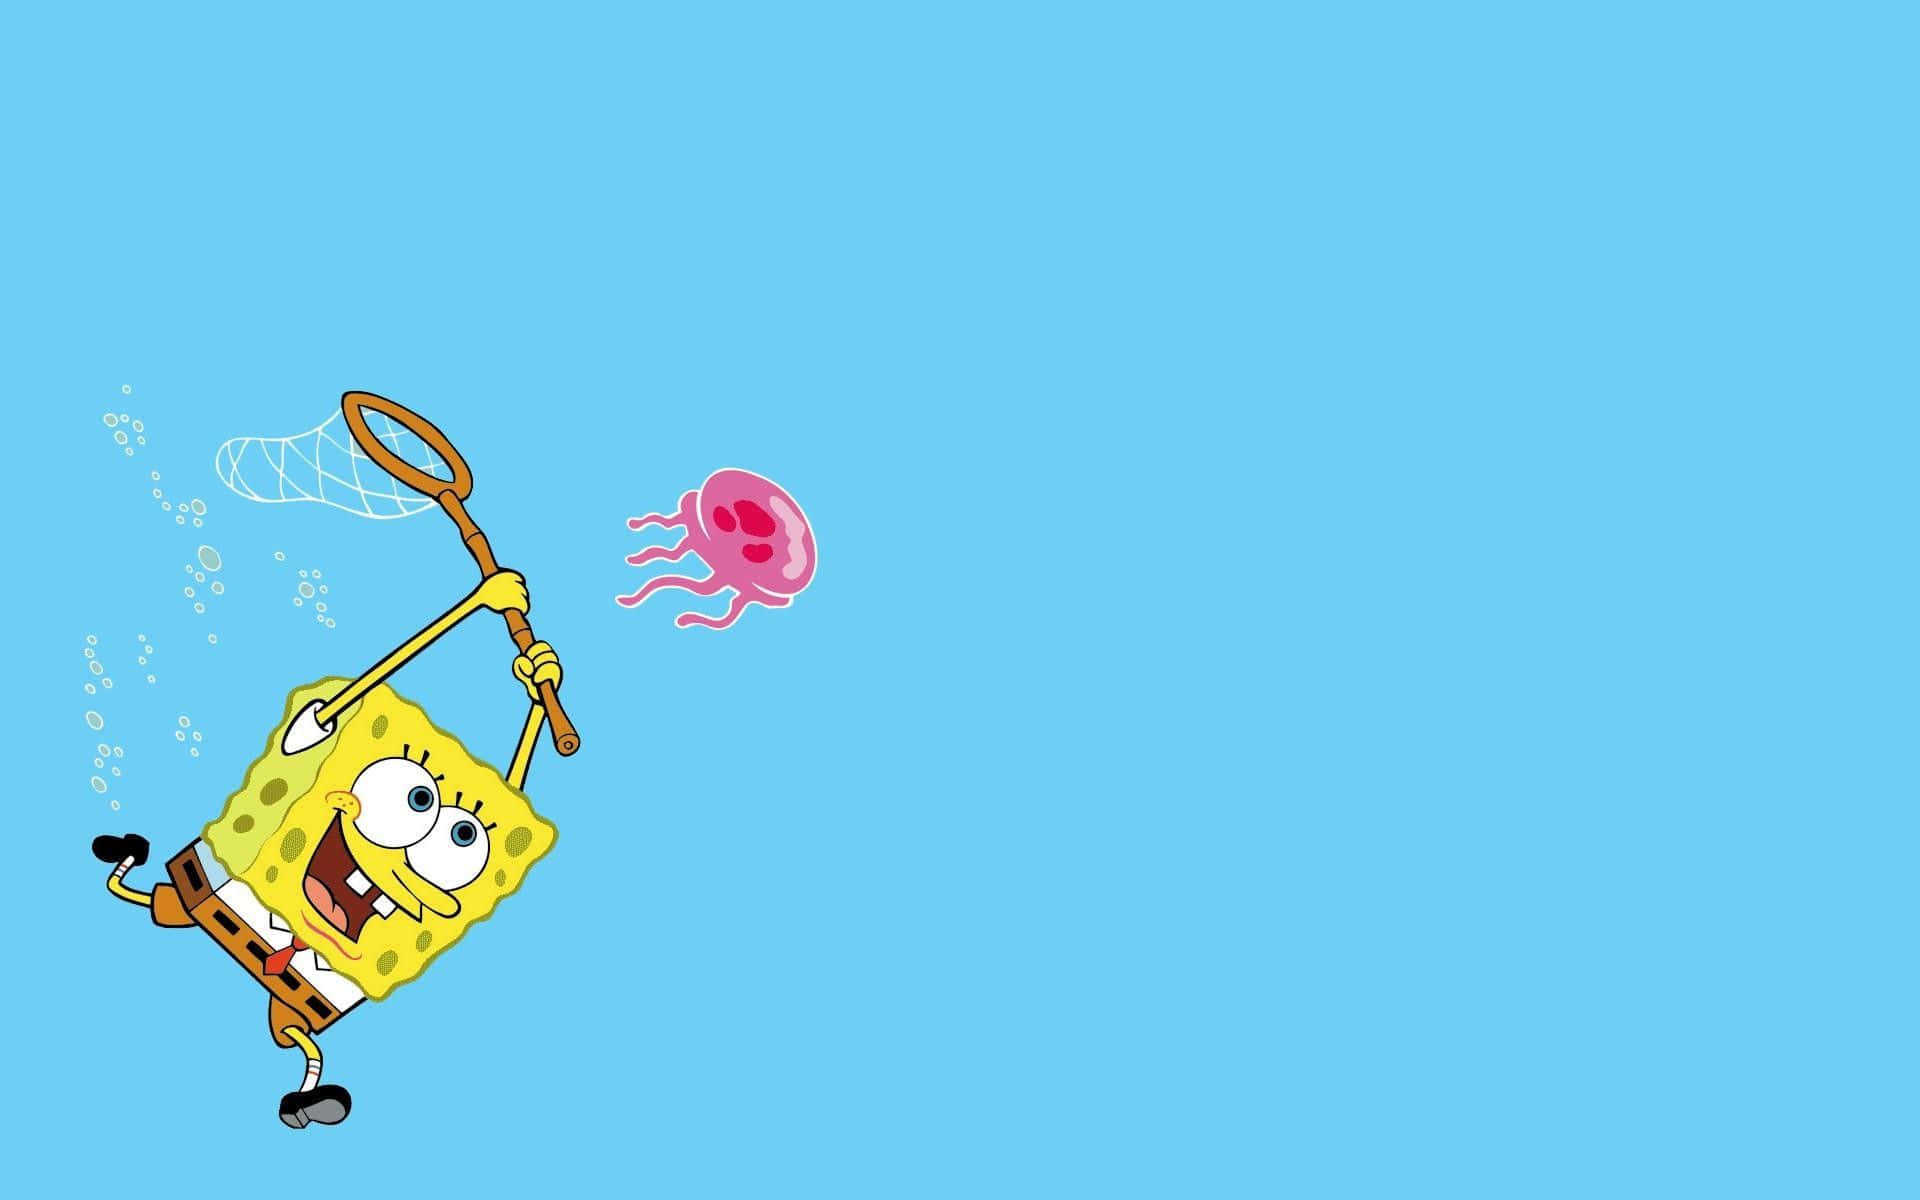 Get lost in the vibrant colors and relaxing vibes of Aesthetic Spongebob